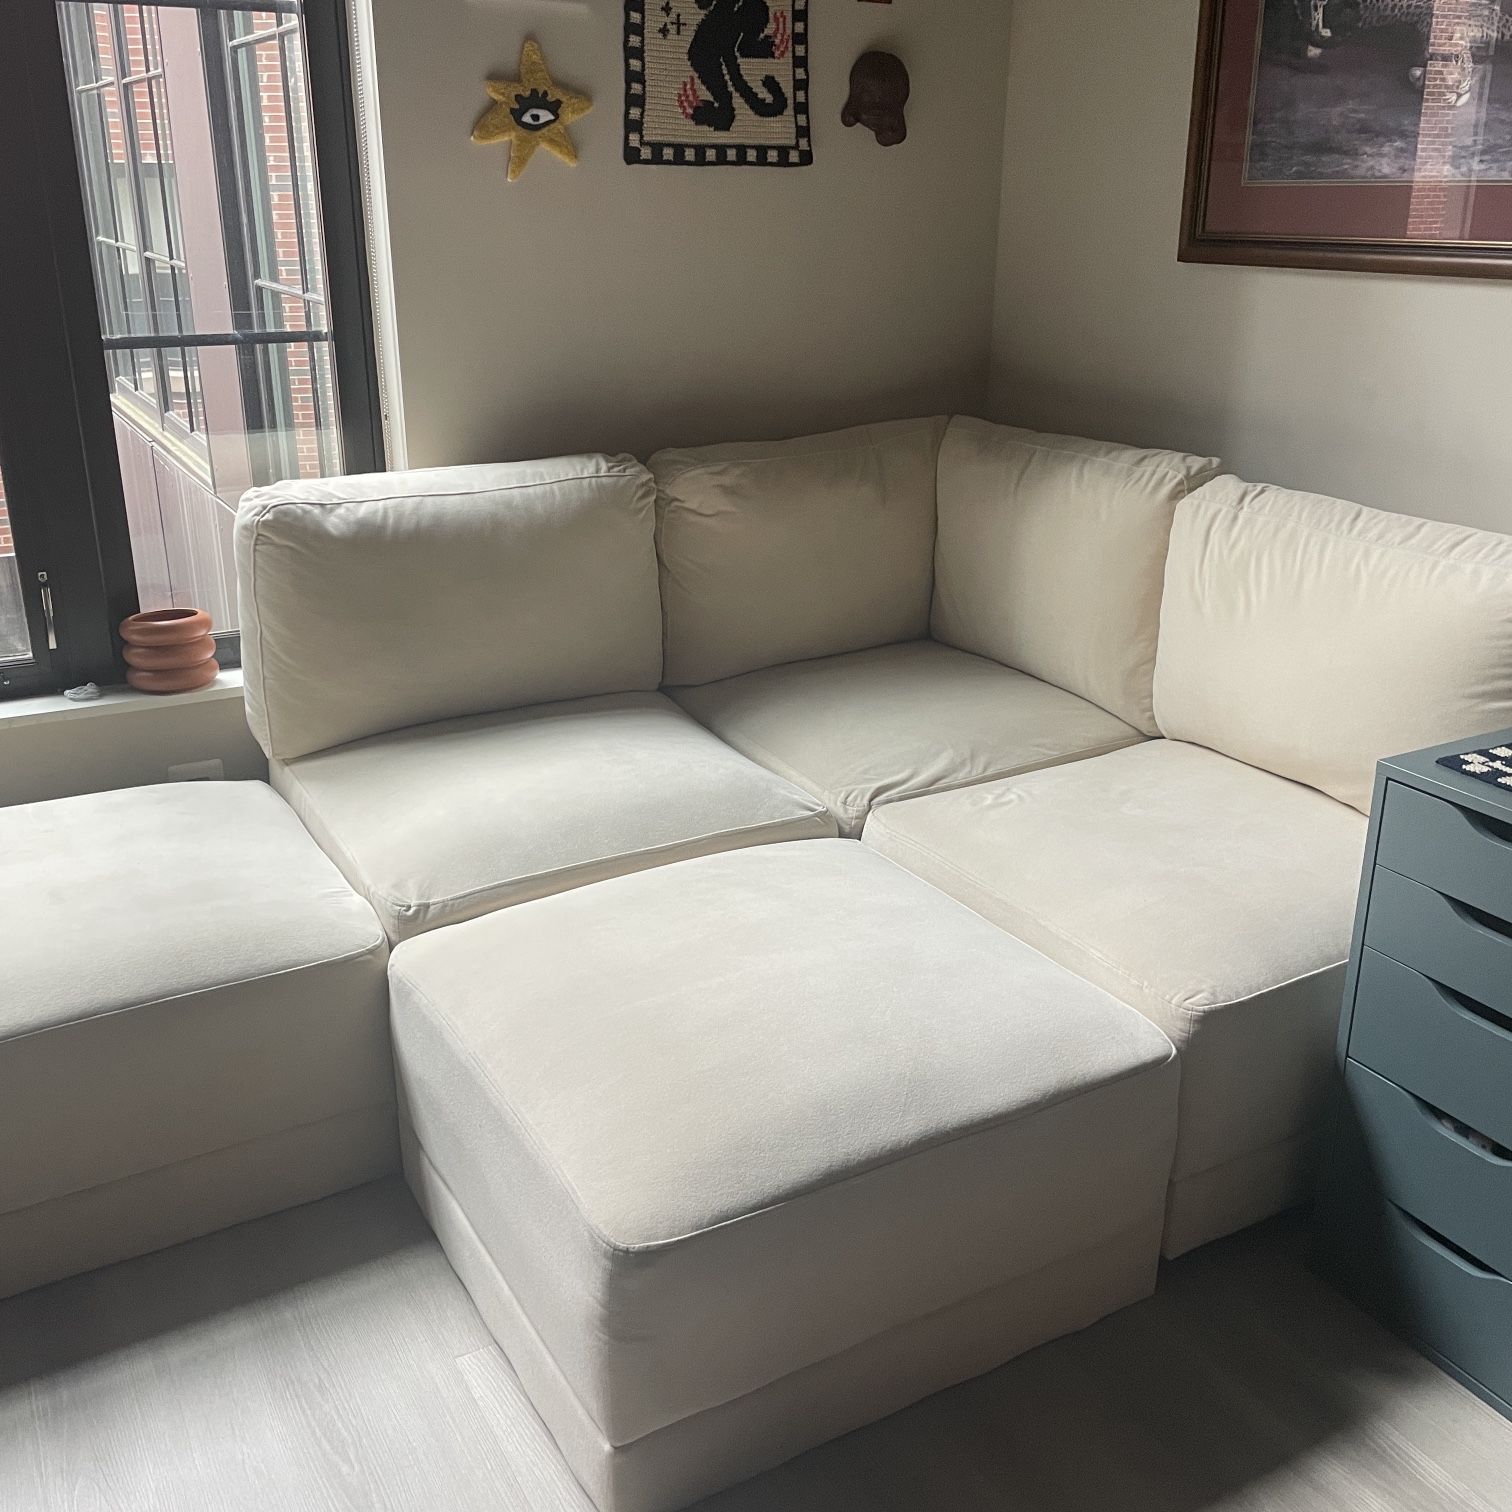 Modular Cream Sectional Sofa Couch - 6 pieces (2 ottomans and 4 sofa seats)